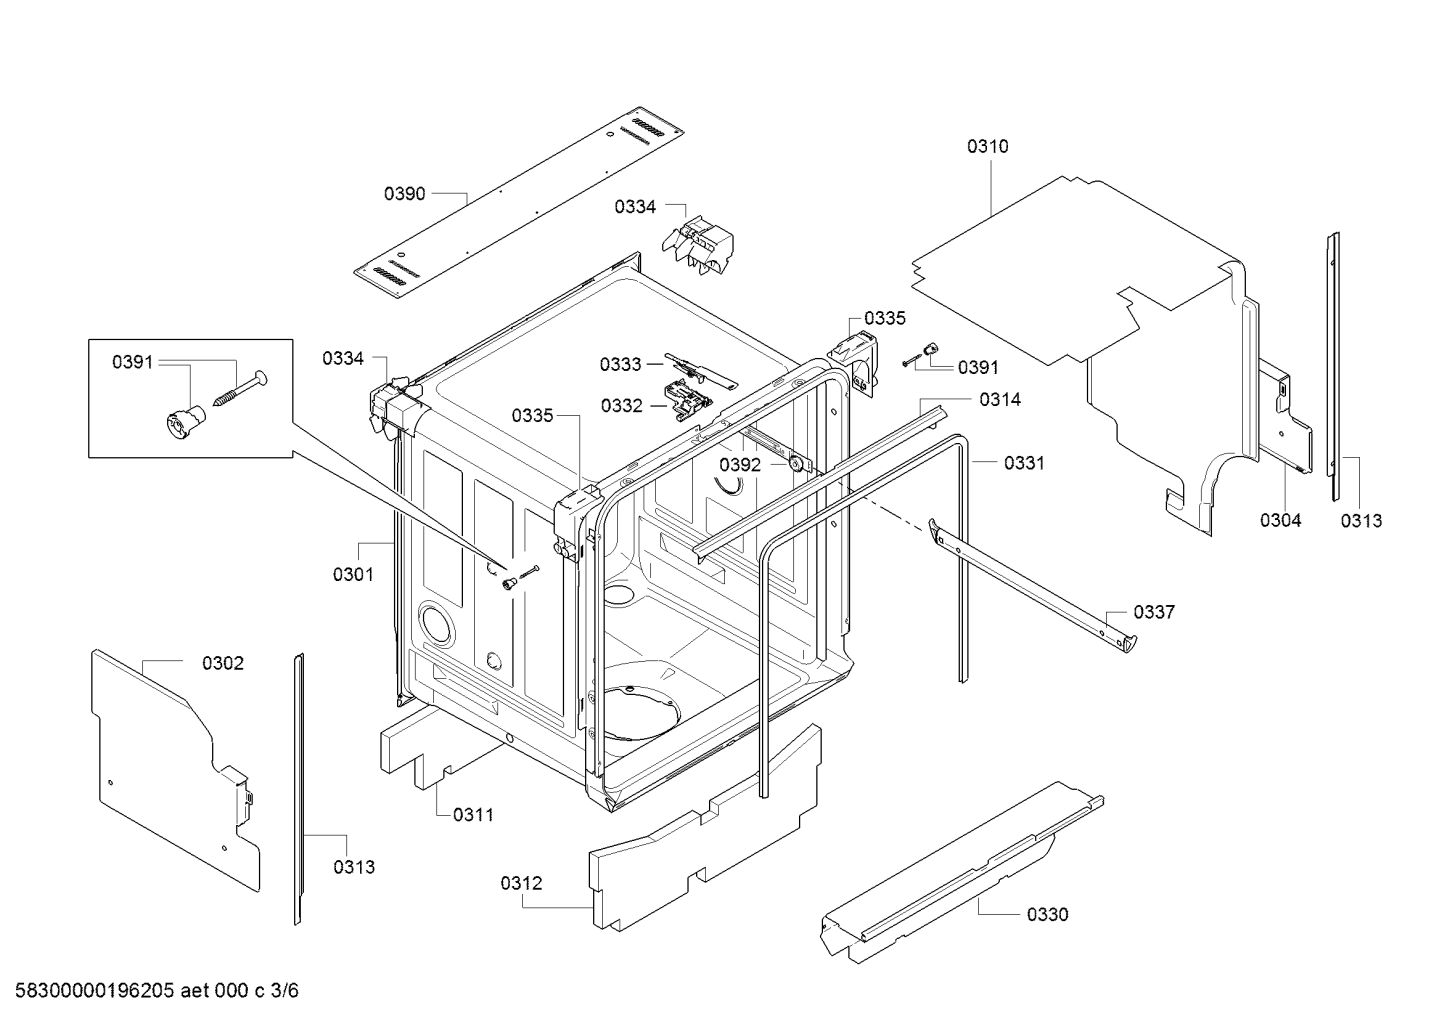 drawing_link_4_device_1719909